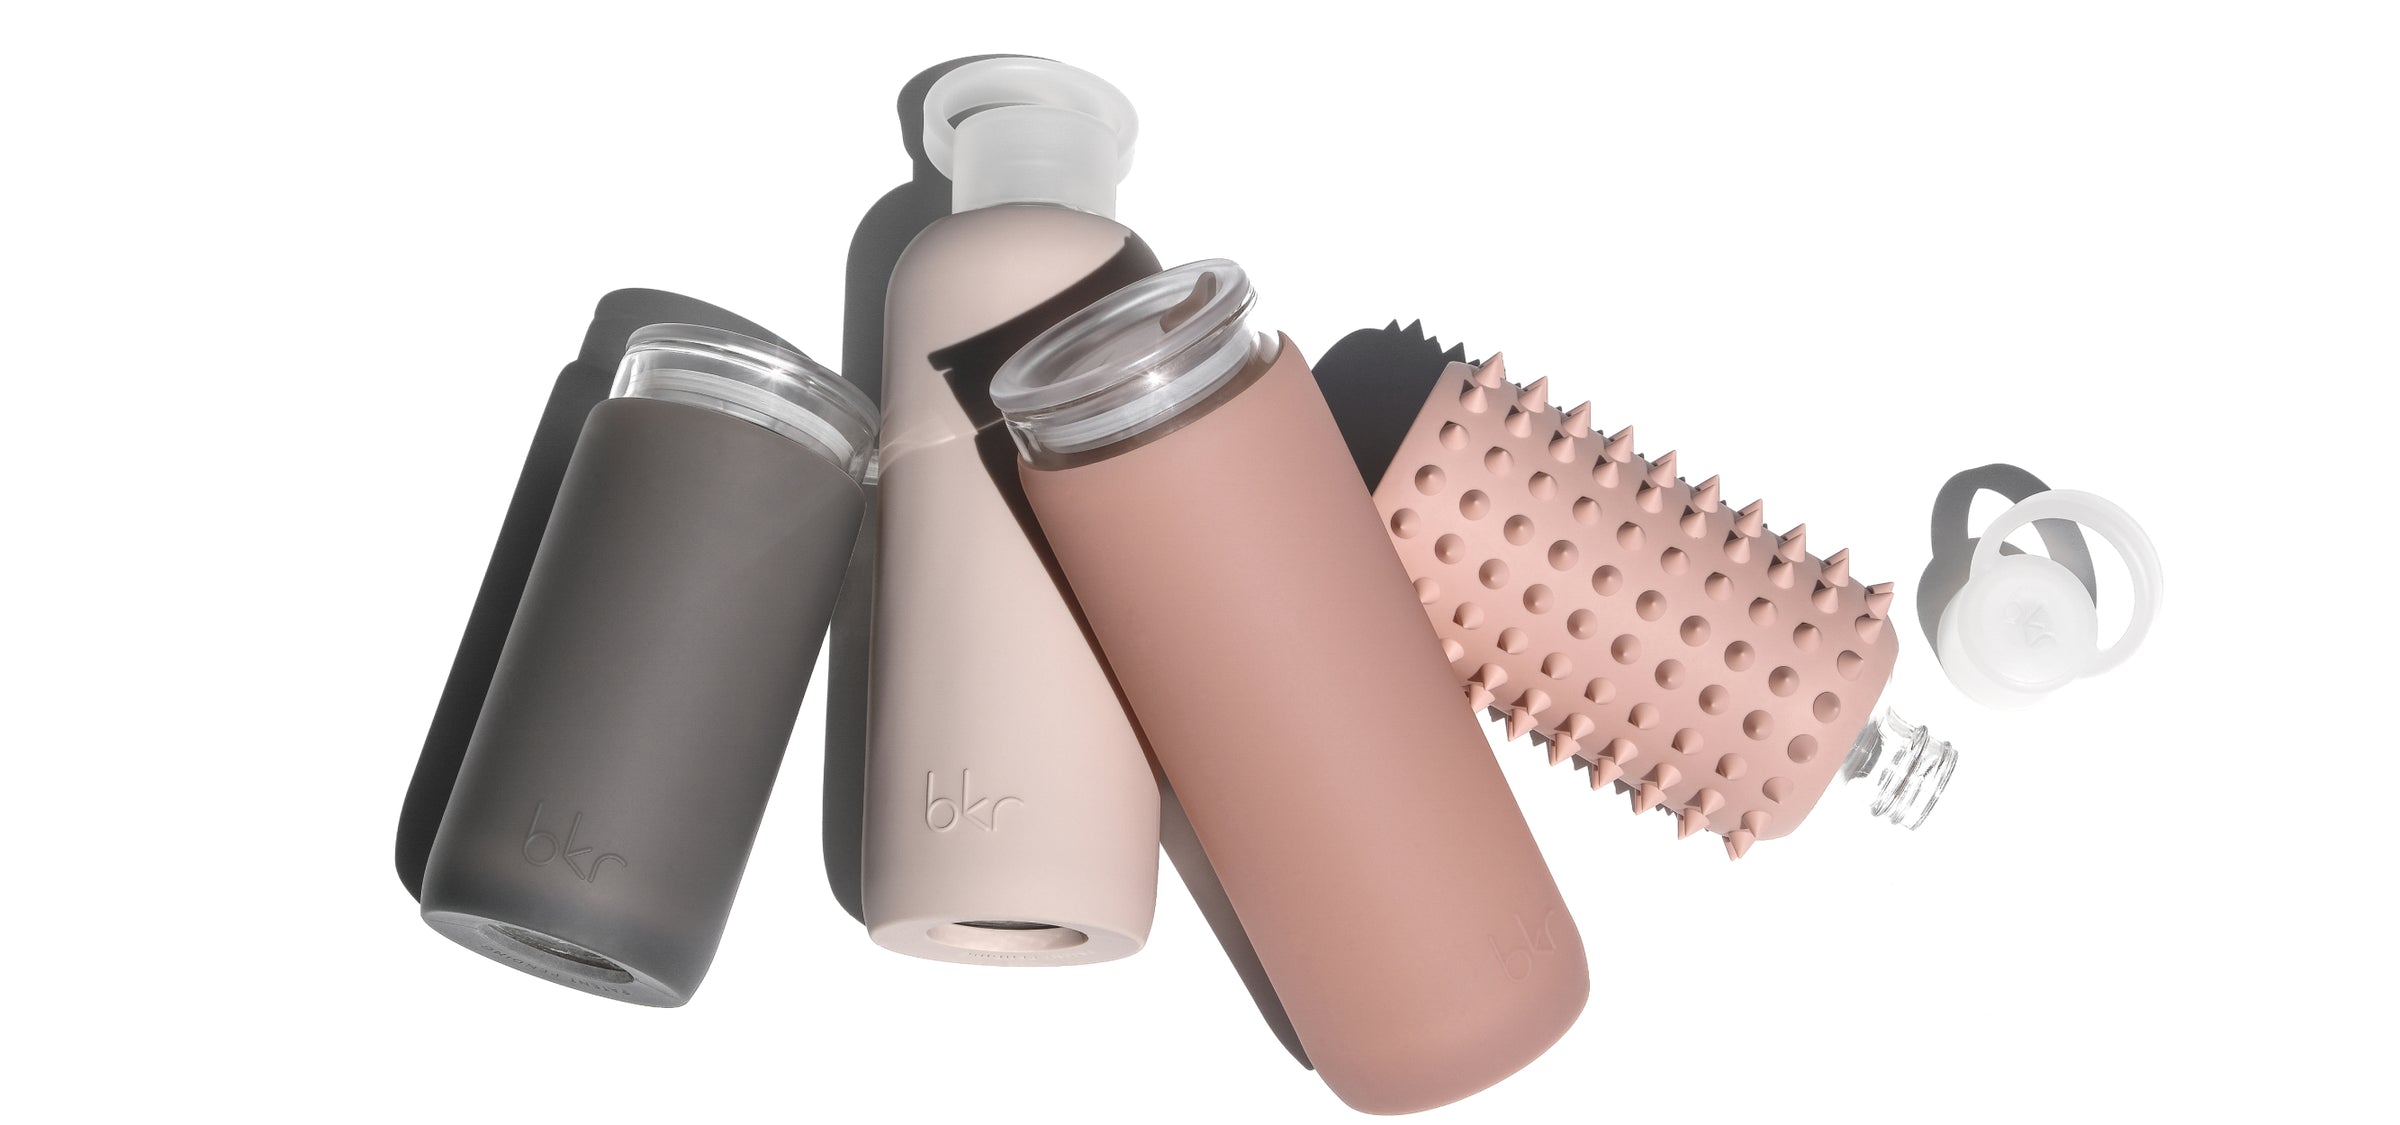 Reusable glass and silicone water bottles and insulated tumblers in natural neutrals.